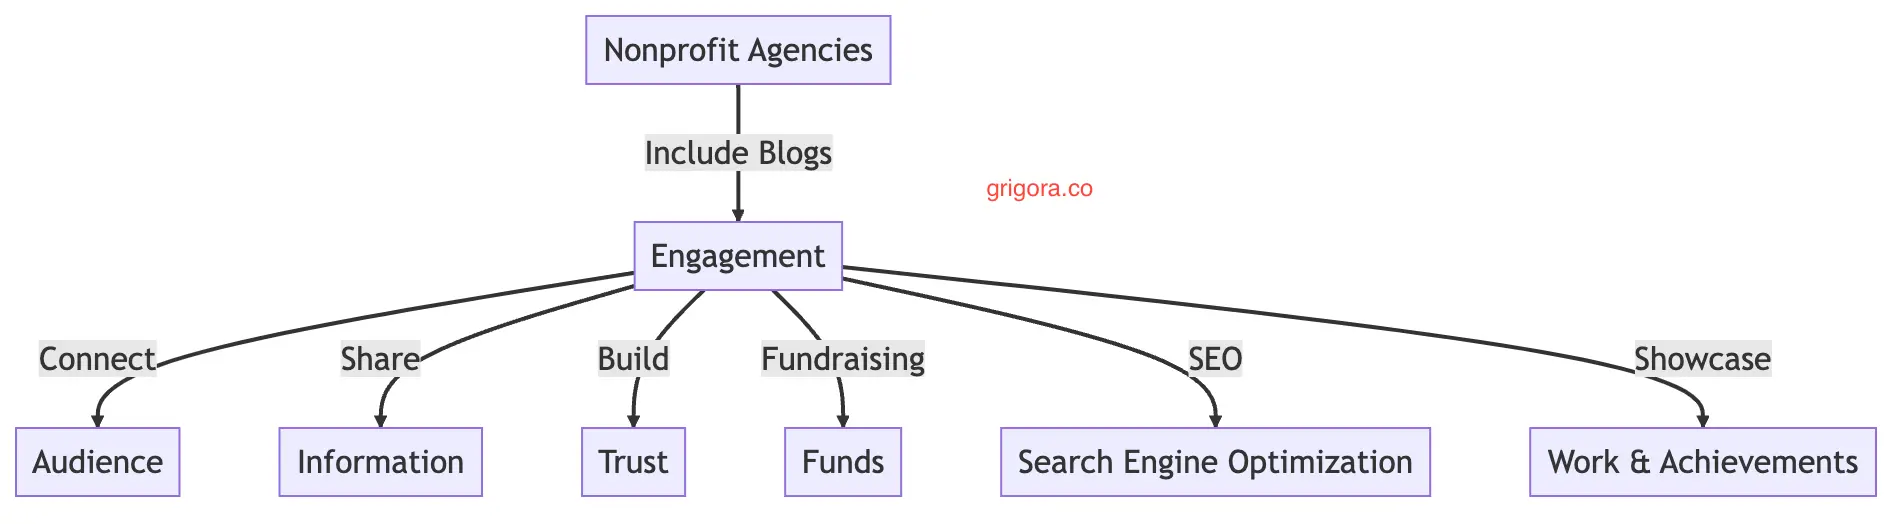 The Importance of Blogs for Nonprofit Agencies